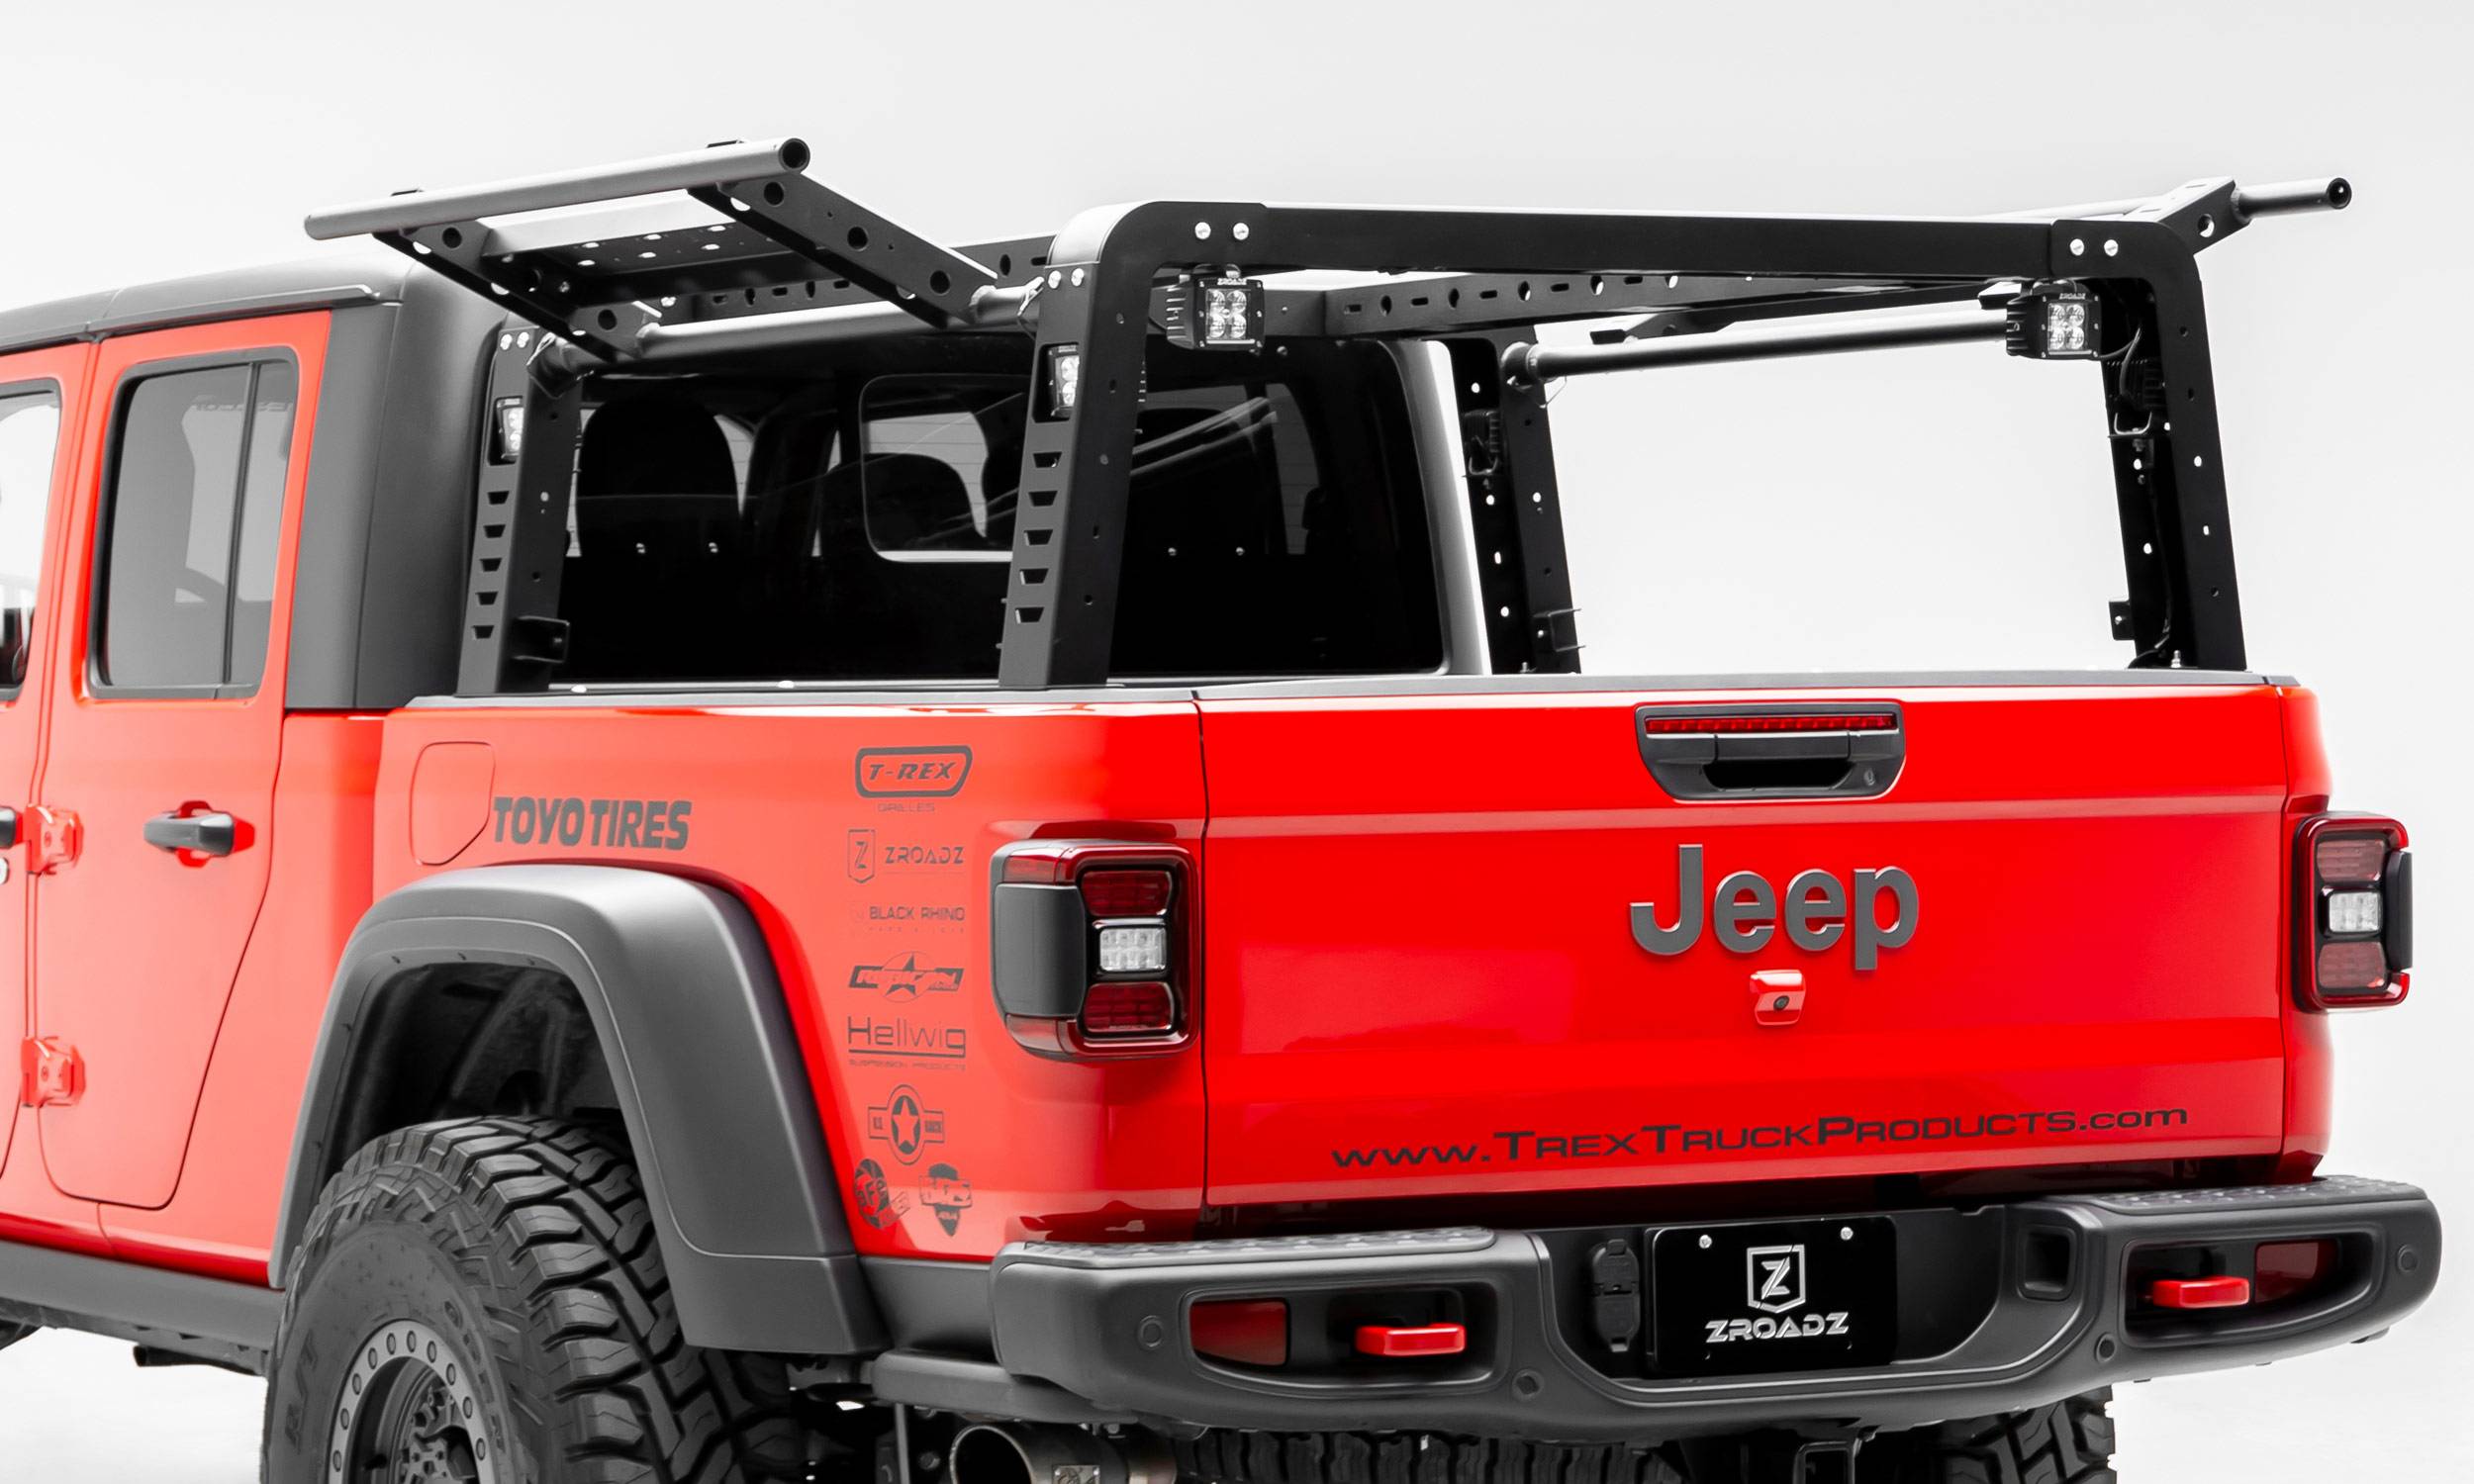 ZROADZ OFF ROAD PRODUCTS - 2019-2022 Jeep Gladiator Access Overland Rack With Two Lifting Side Gates, For use on Factory Trail Rail Cargo Systems - PN #Z834111